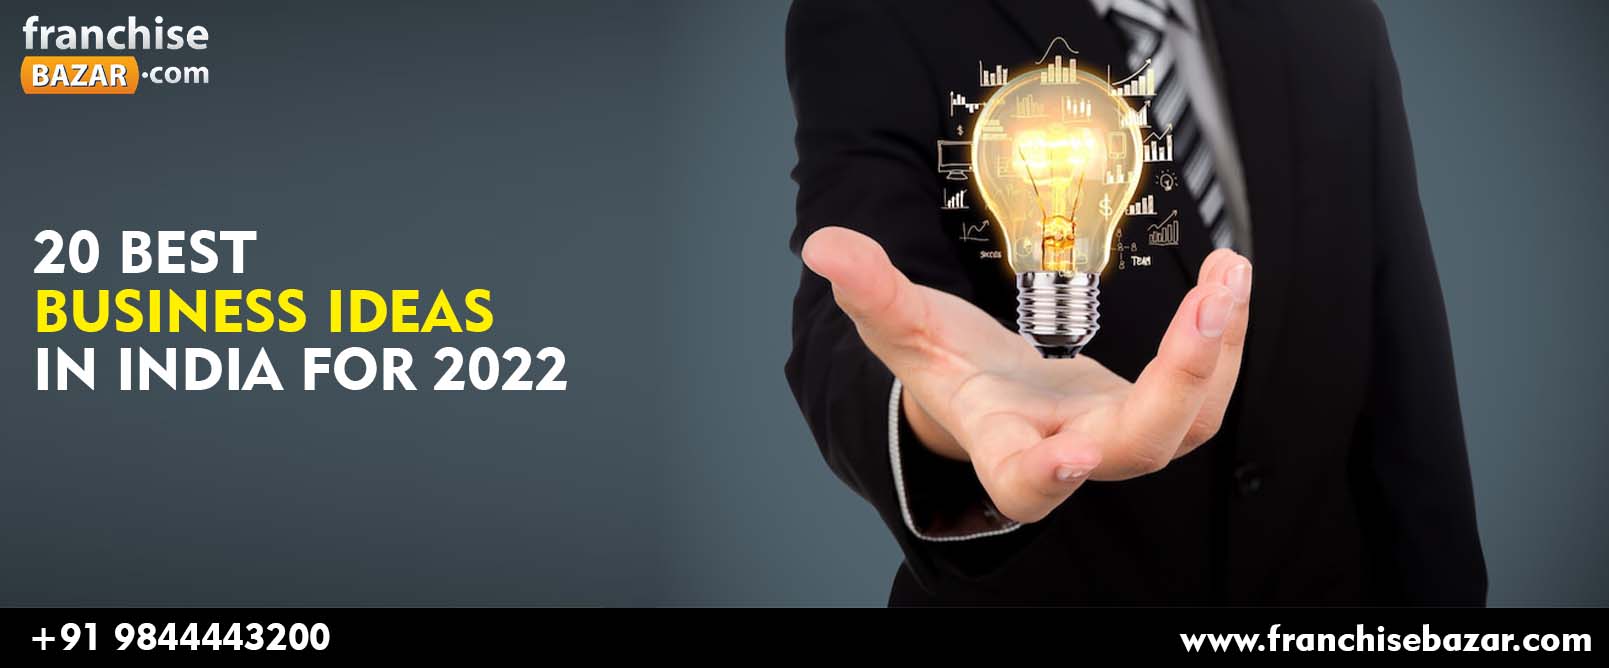 20 Best New Business Ideas In India For 2022